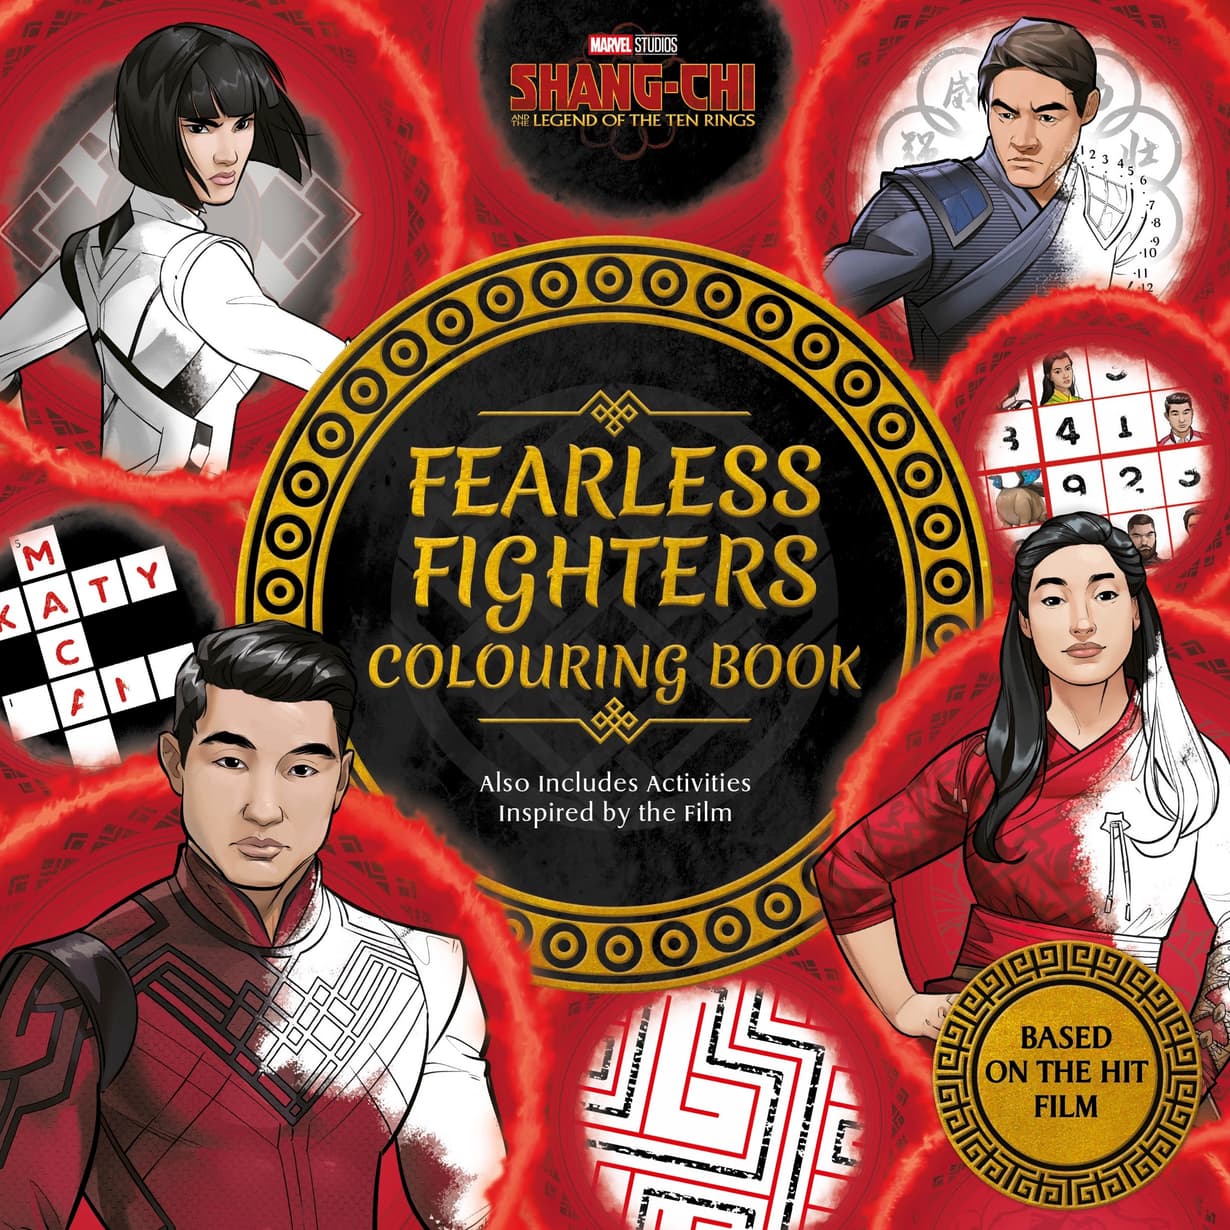 SHANG-CHI AND THE LEGEND OF THE TEN RINGS: FEARLESS FIGHTERS COLOURING BOOK